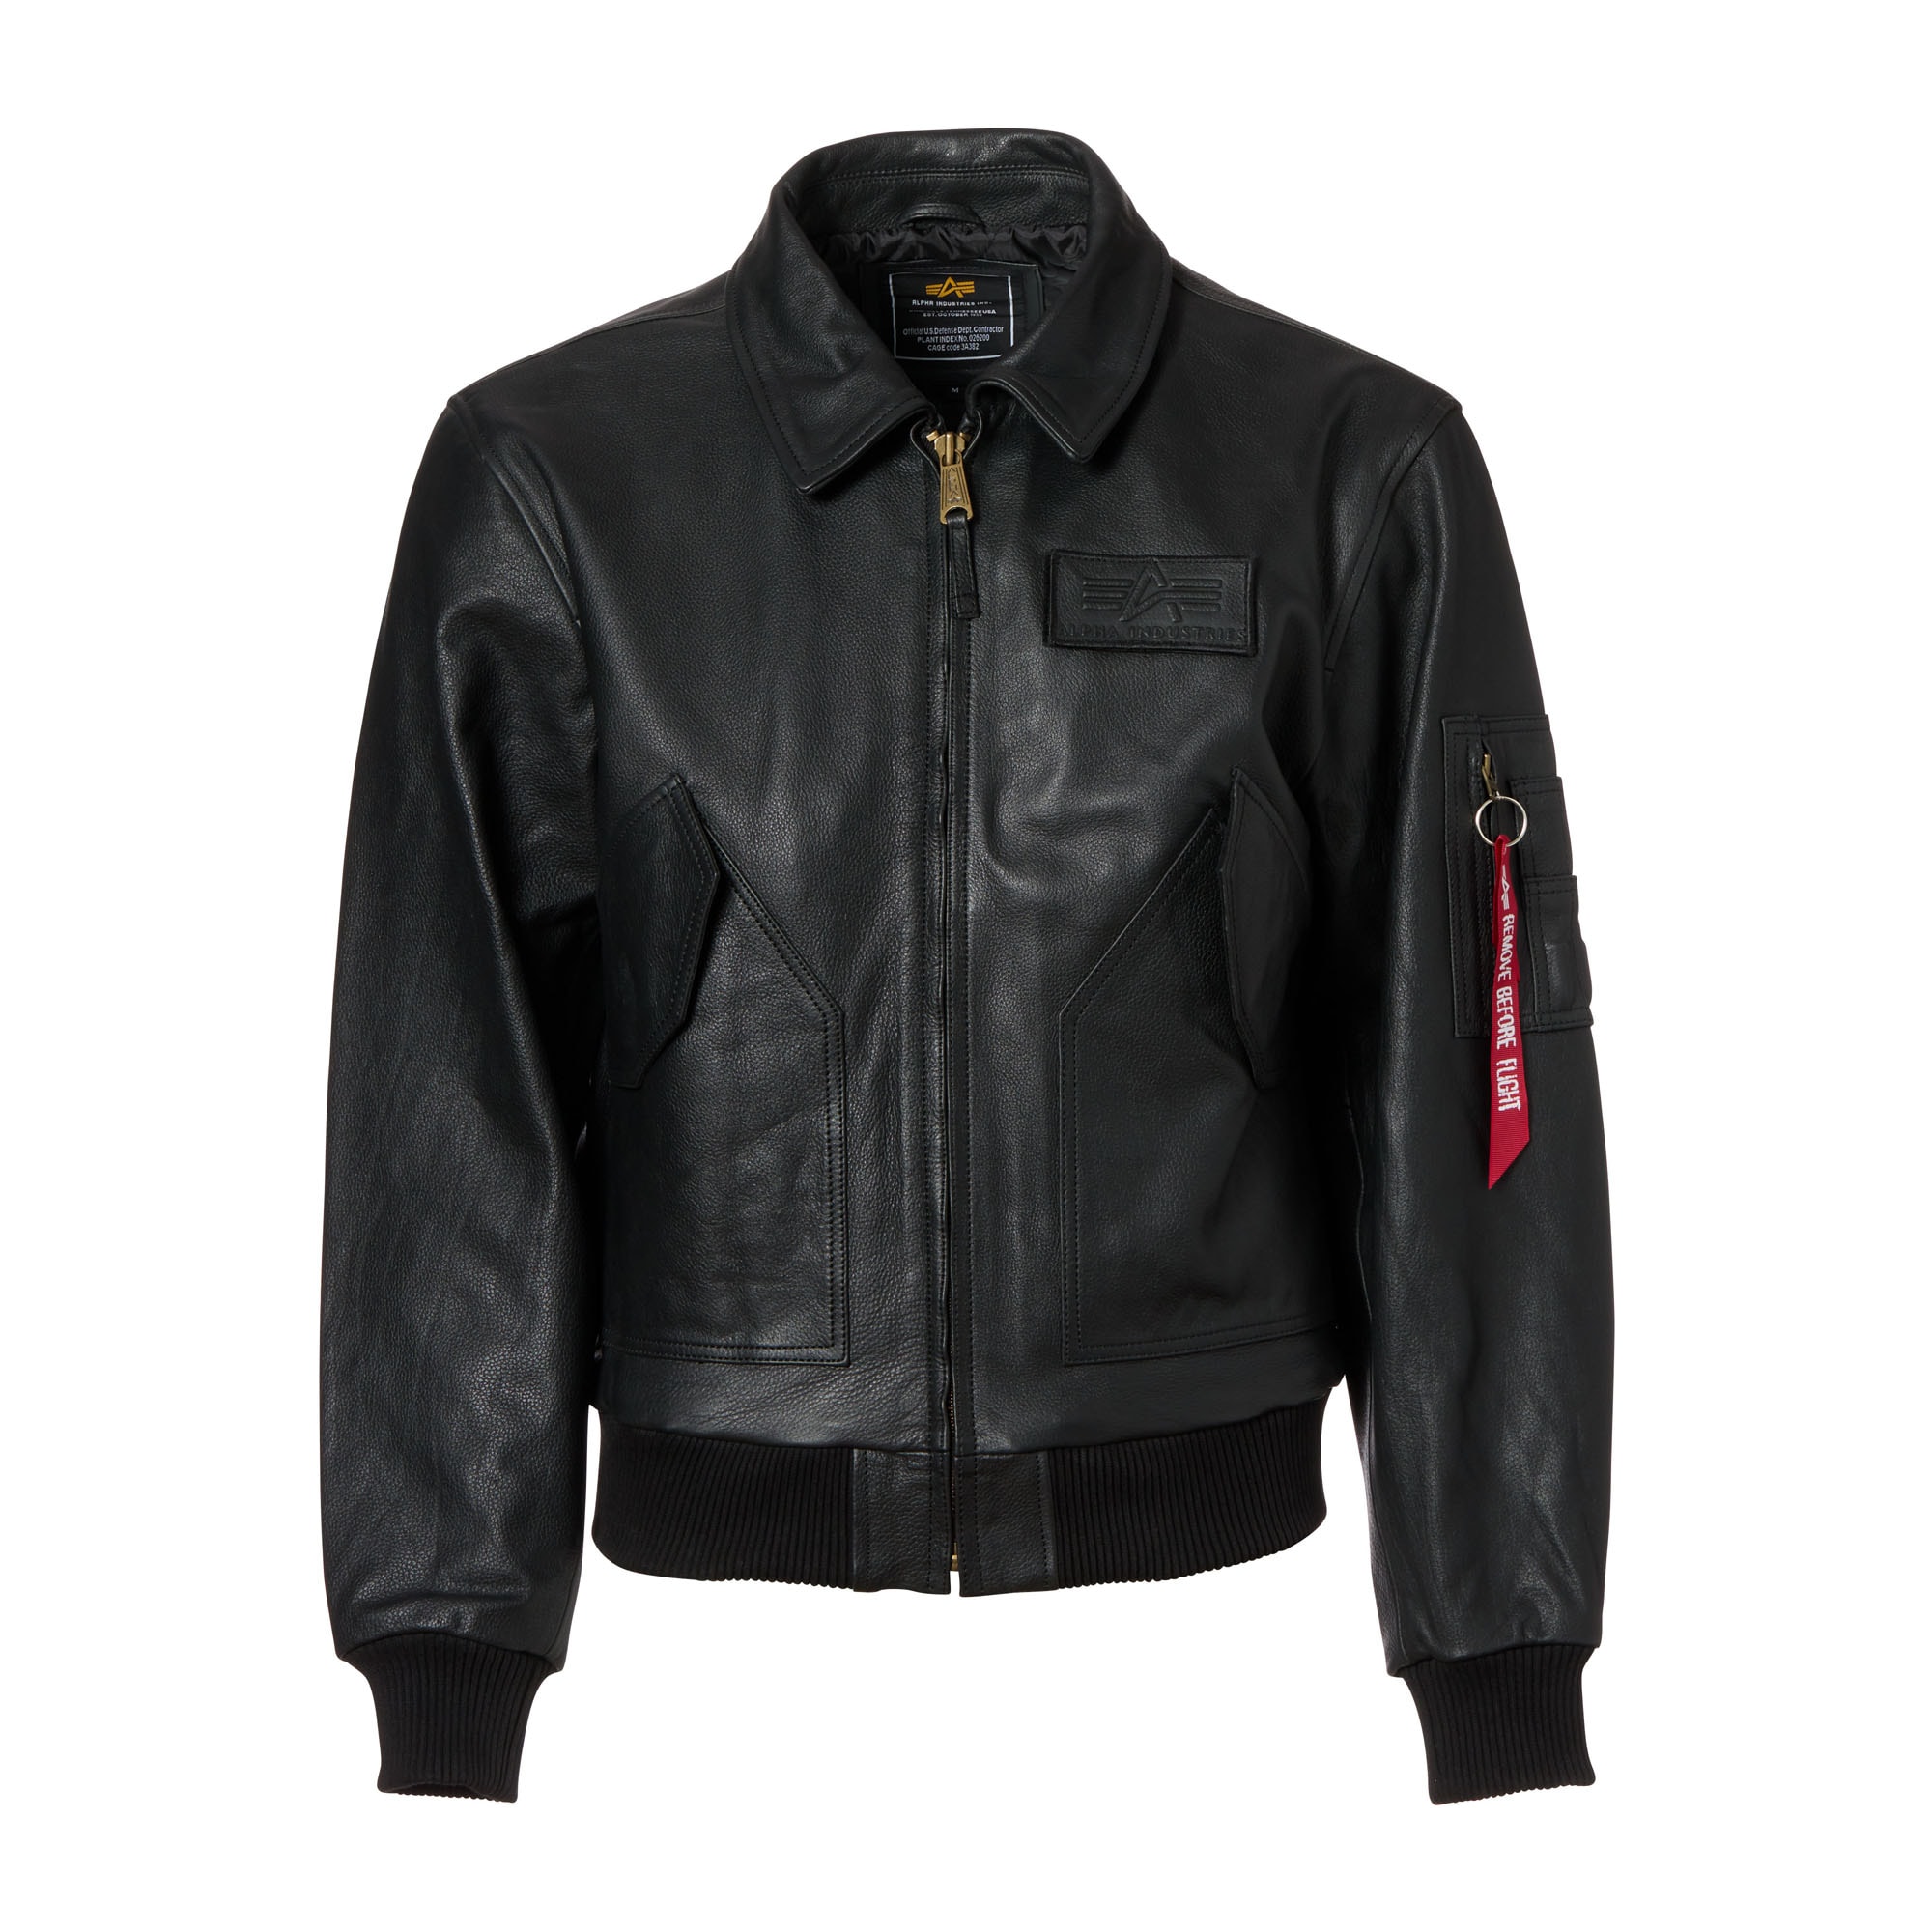 Purchase the Alpha Industries Flight Jacket CWU Leather black by